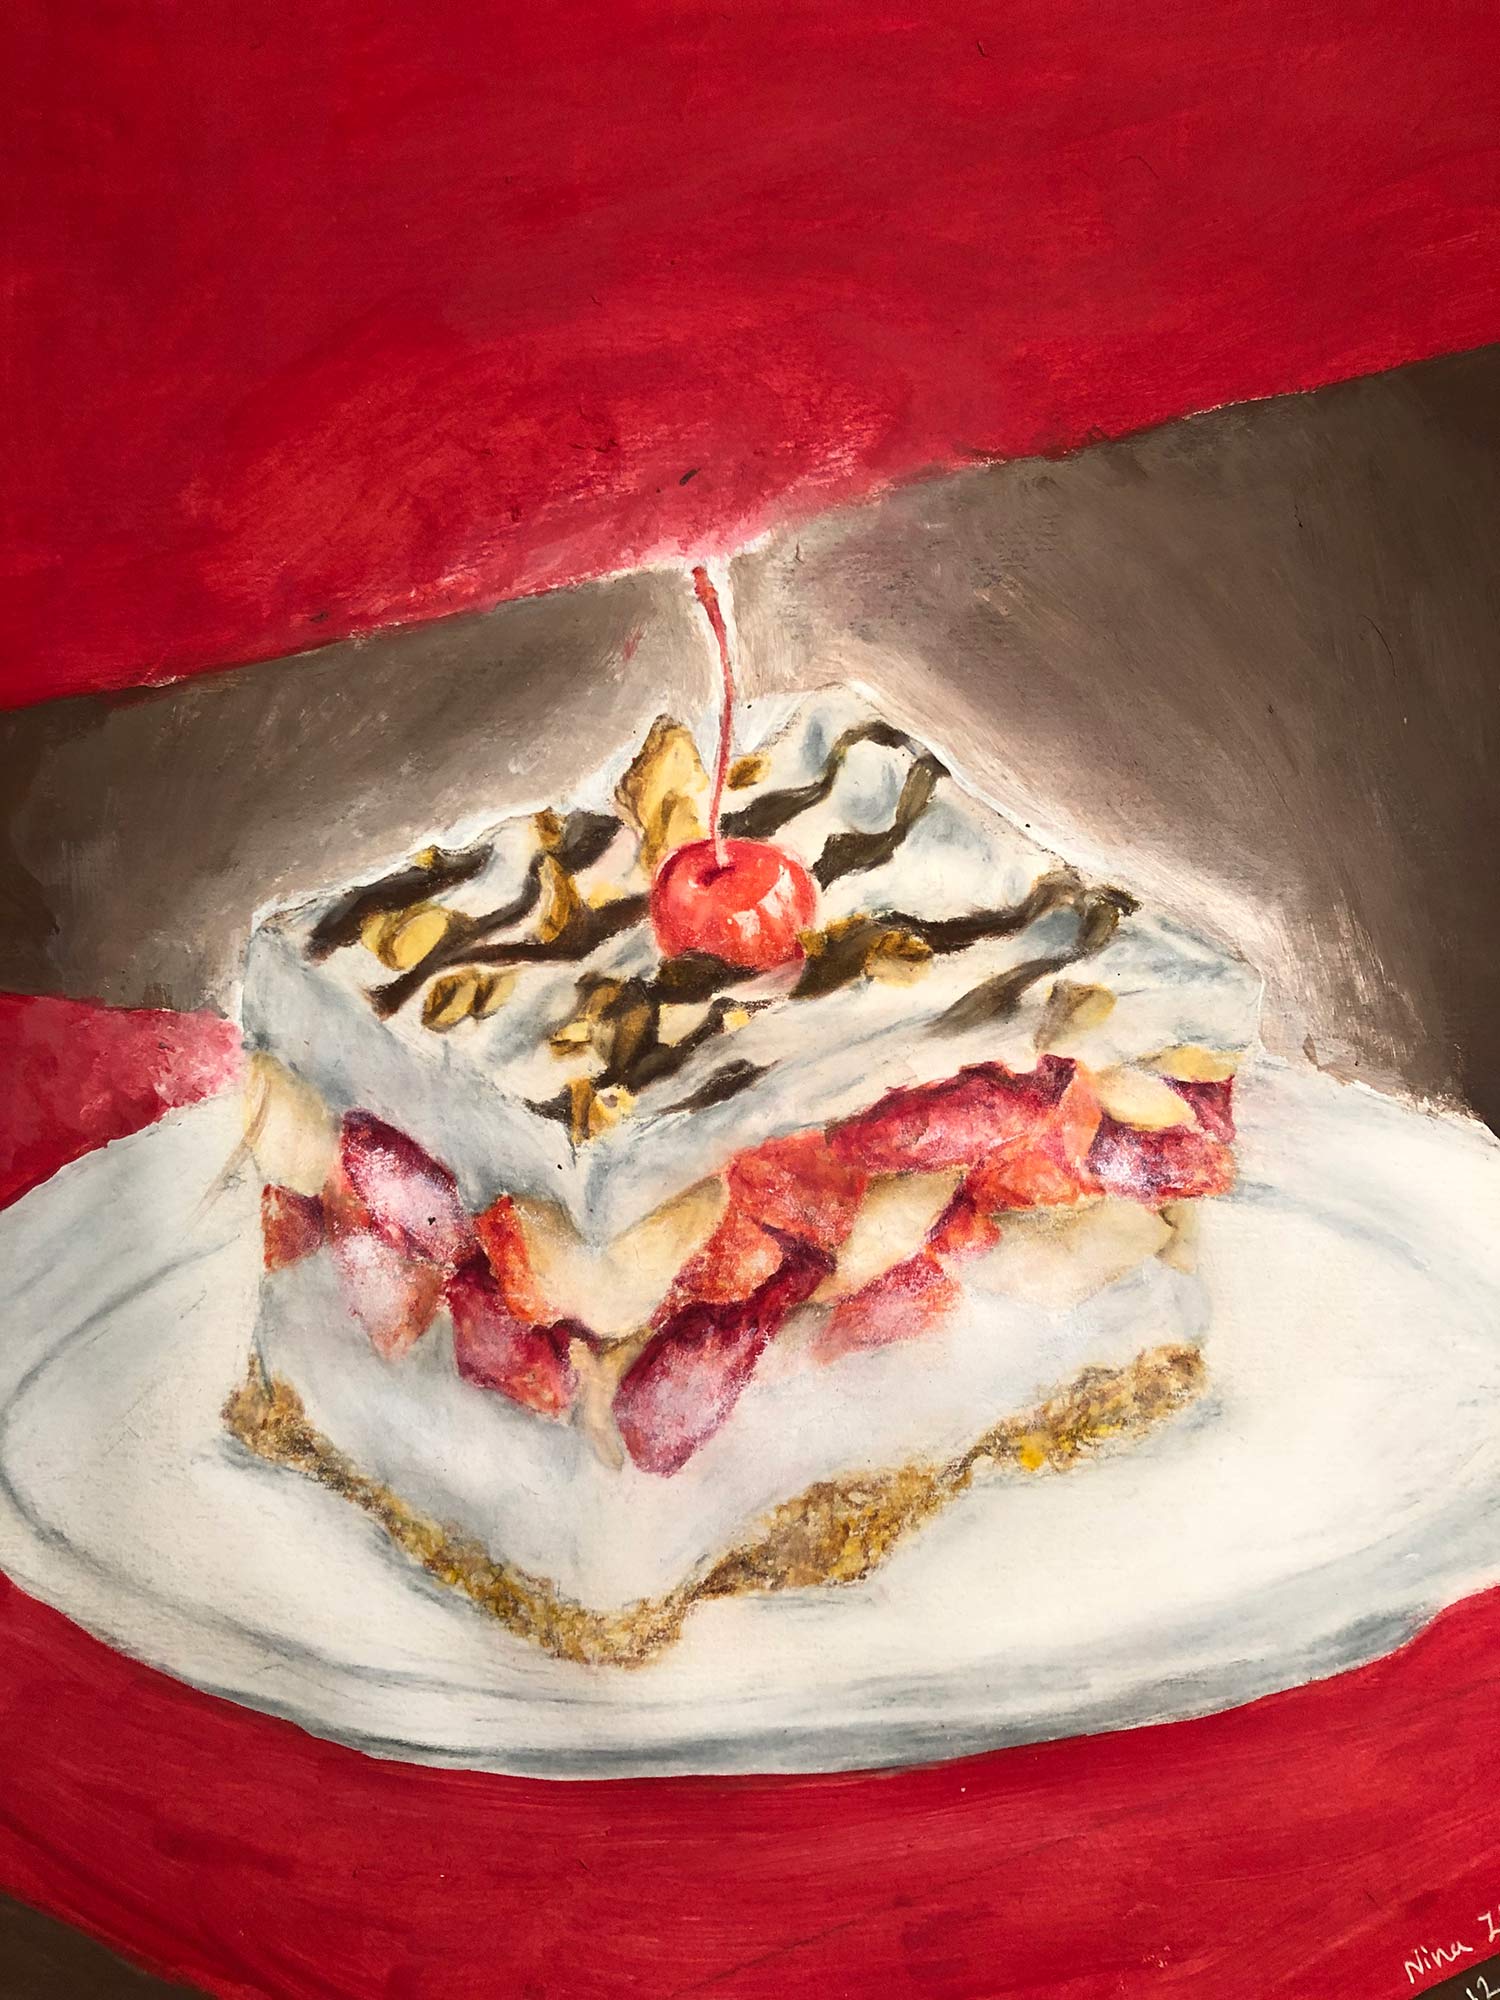 A painting of a rectangular slice of layered cake with strawberries